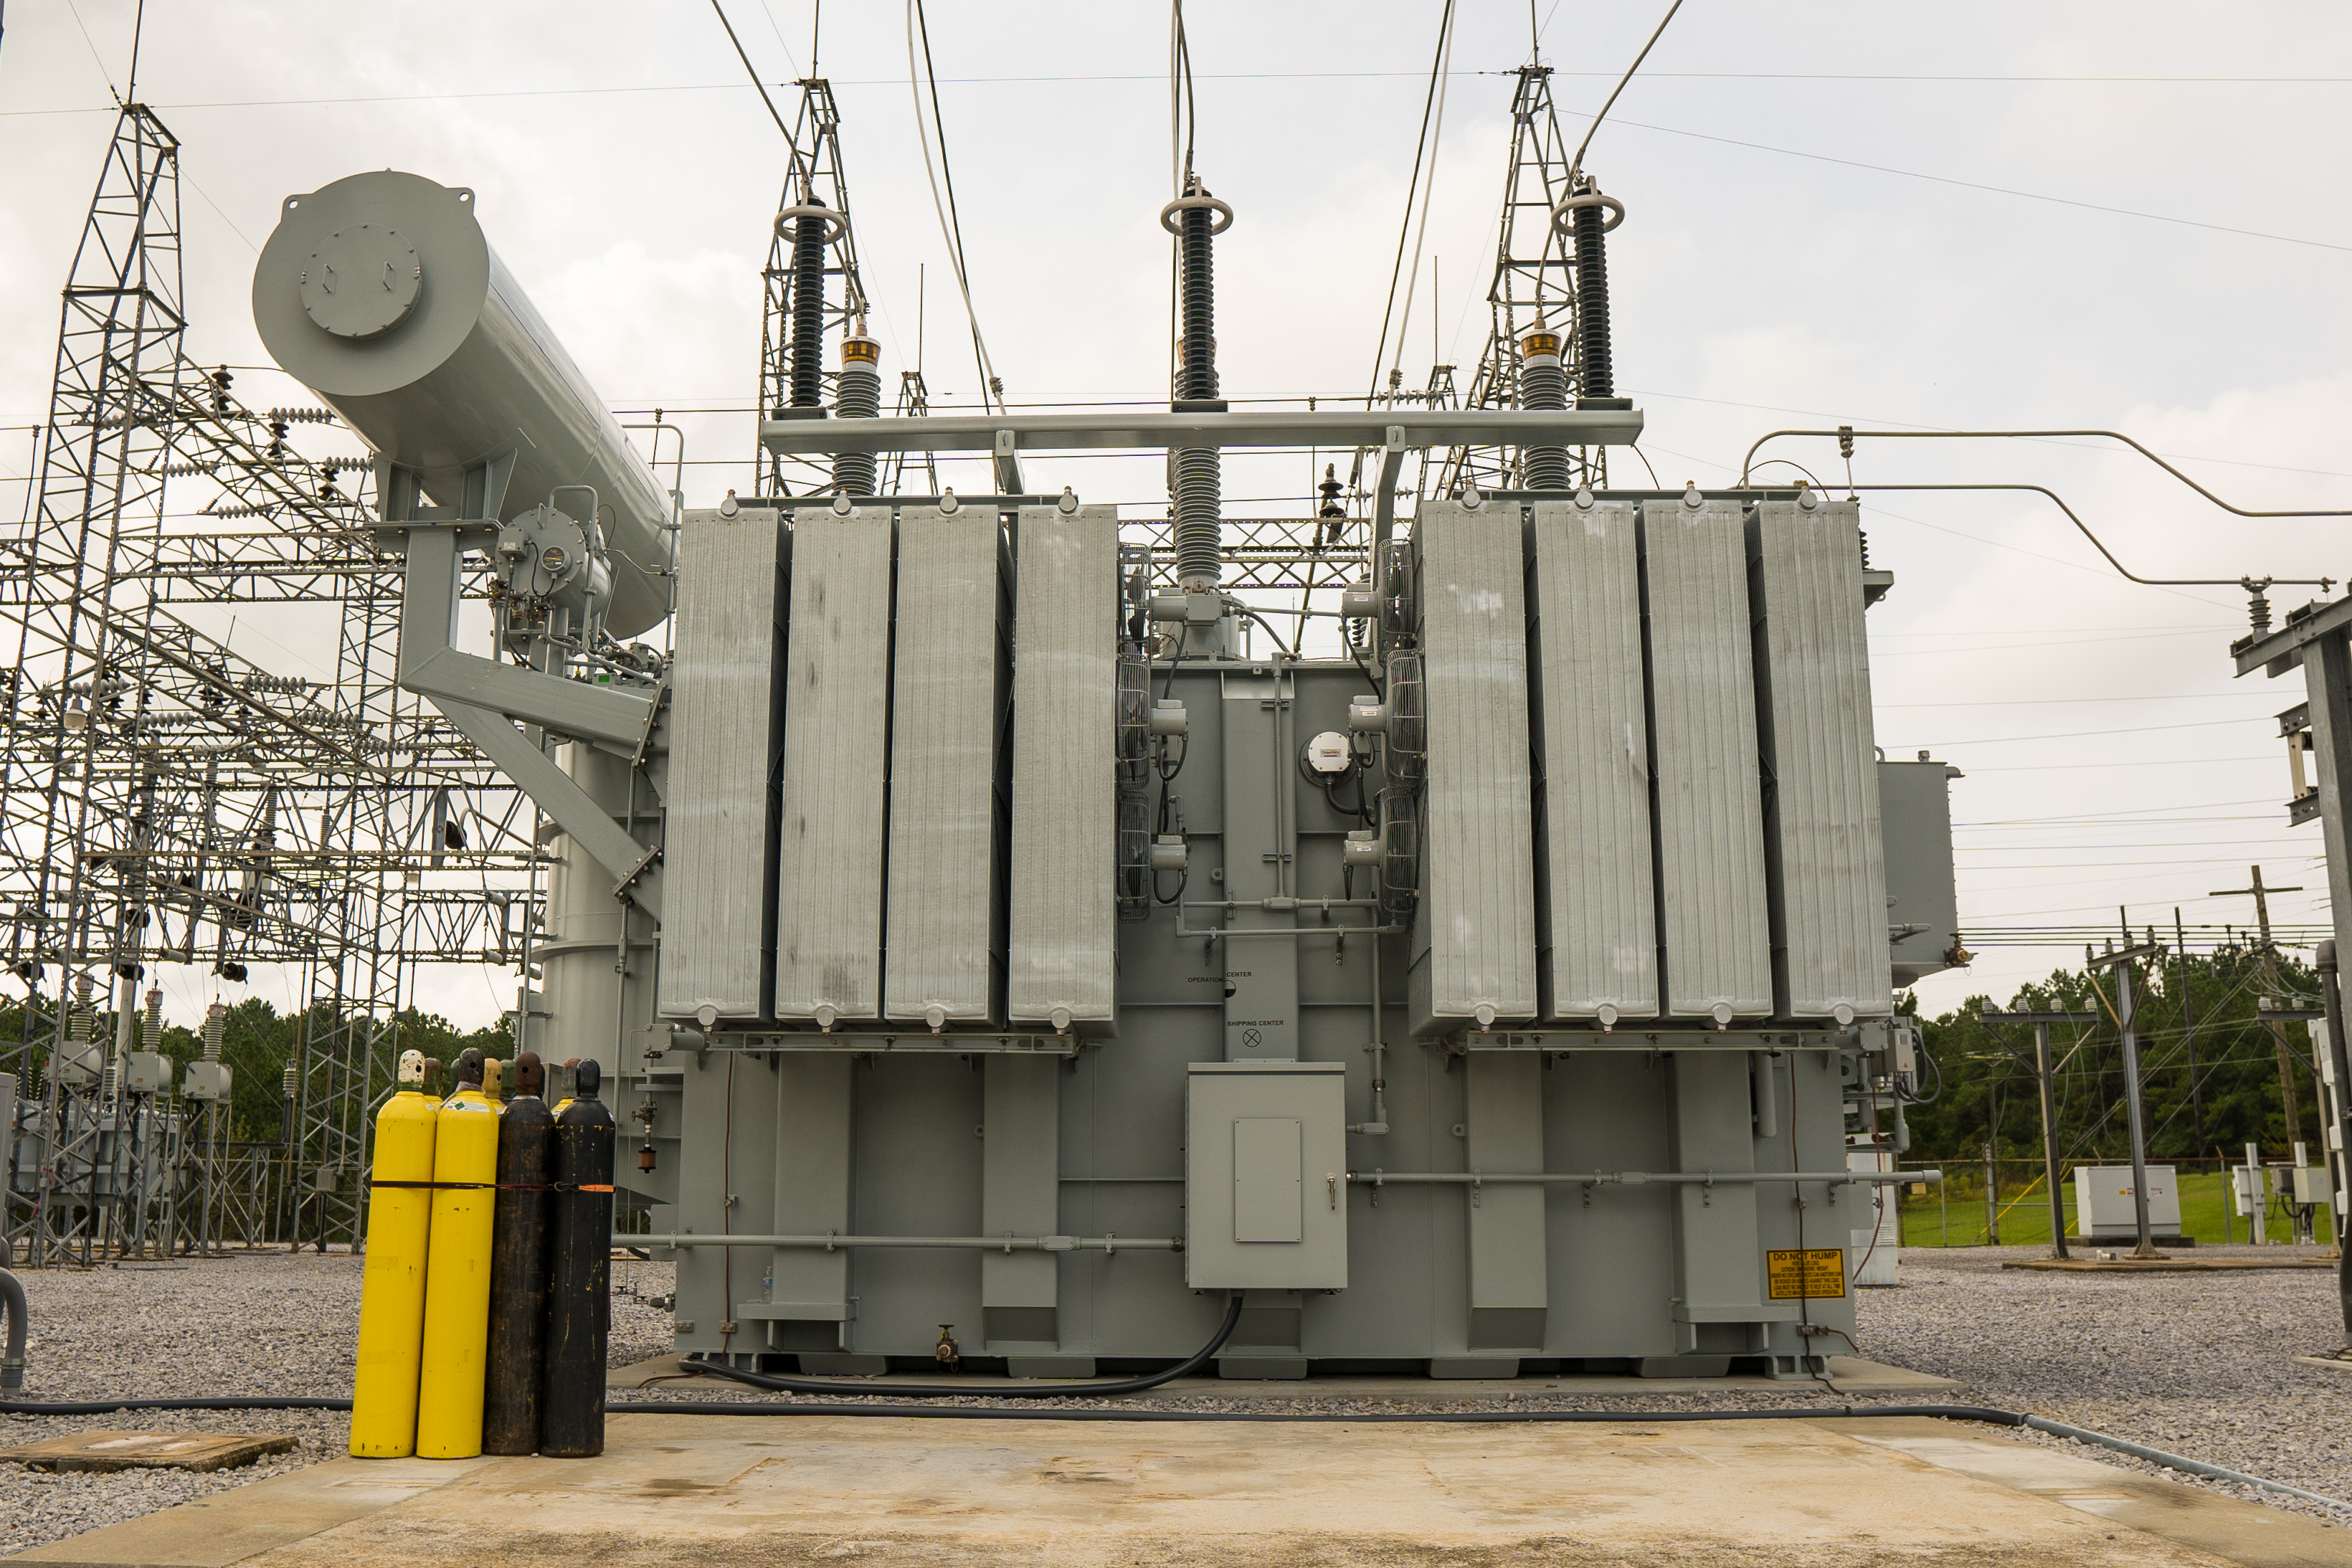 GE Research and Prolec GE Power Up World's 1st Large Flexible Transformer  to Enhance the Resiliency of America's Grid